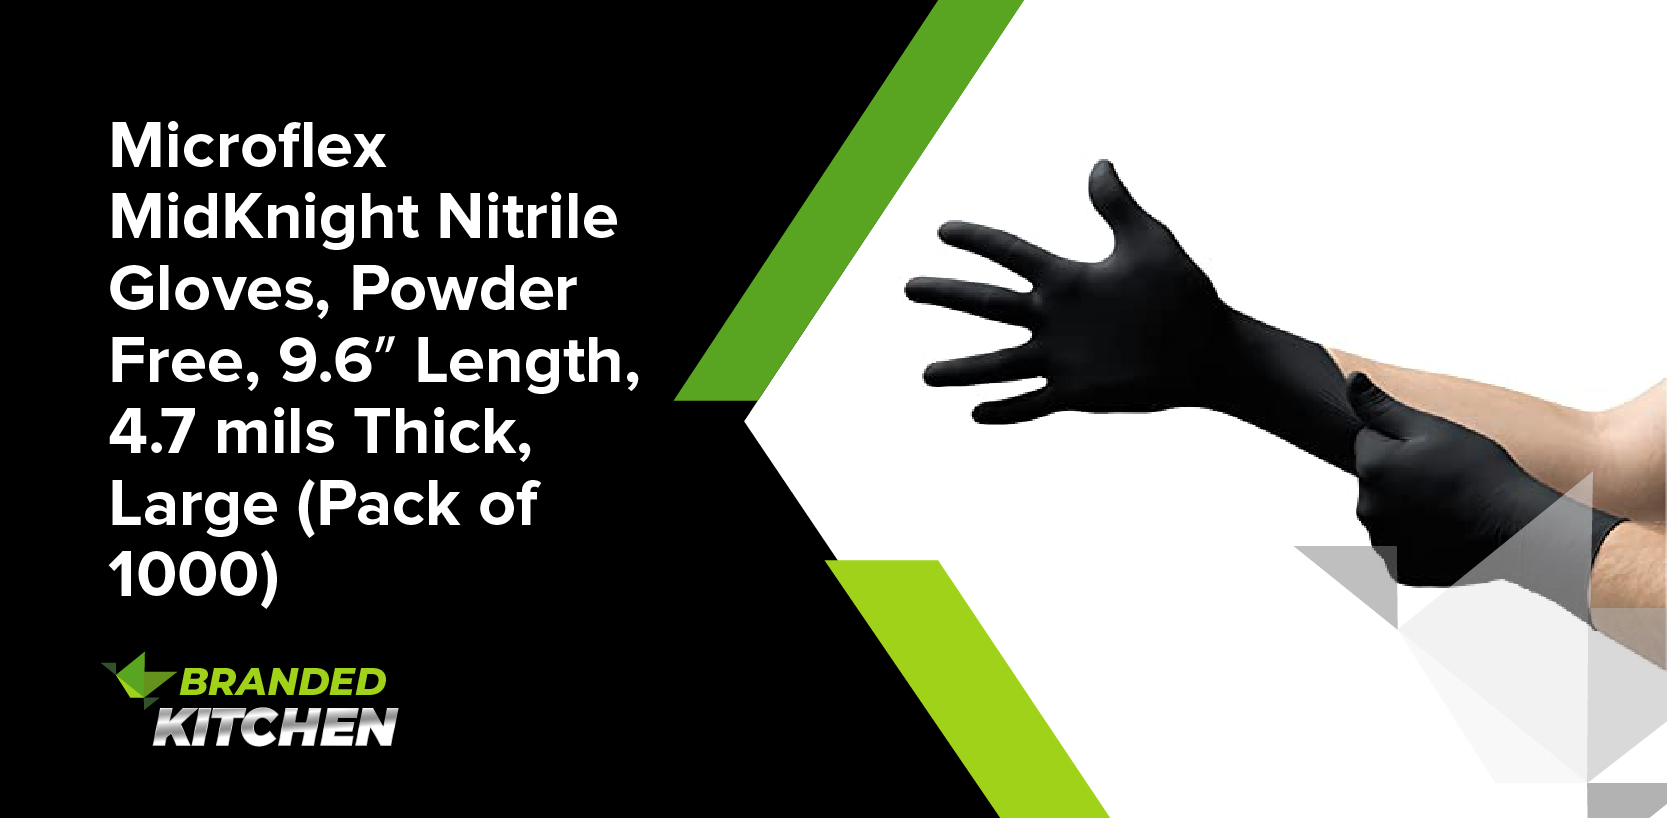 Microflex MidKnight Nitrile Gloves, Powder Free, 9.6″ Length, 4.7 mils Thick, Large (Pack of 1000)